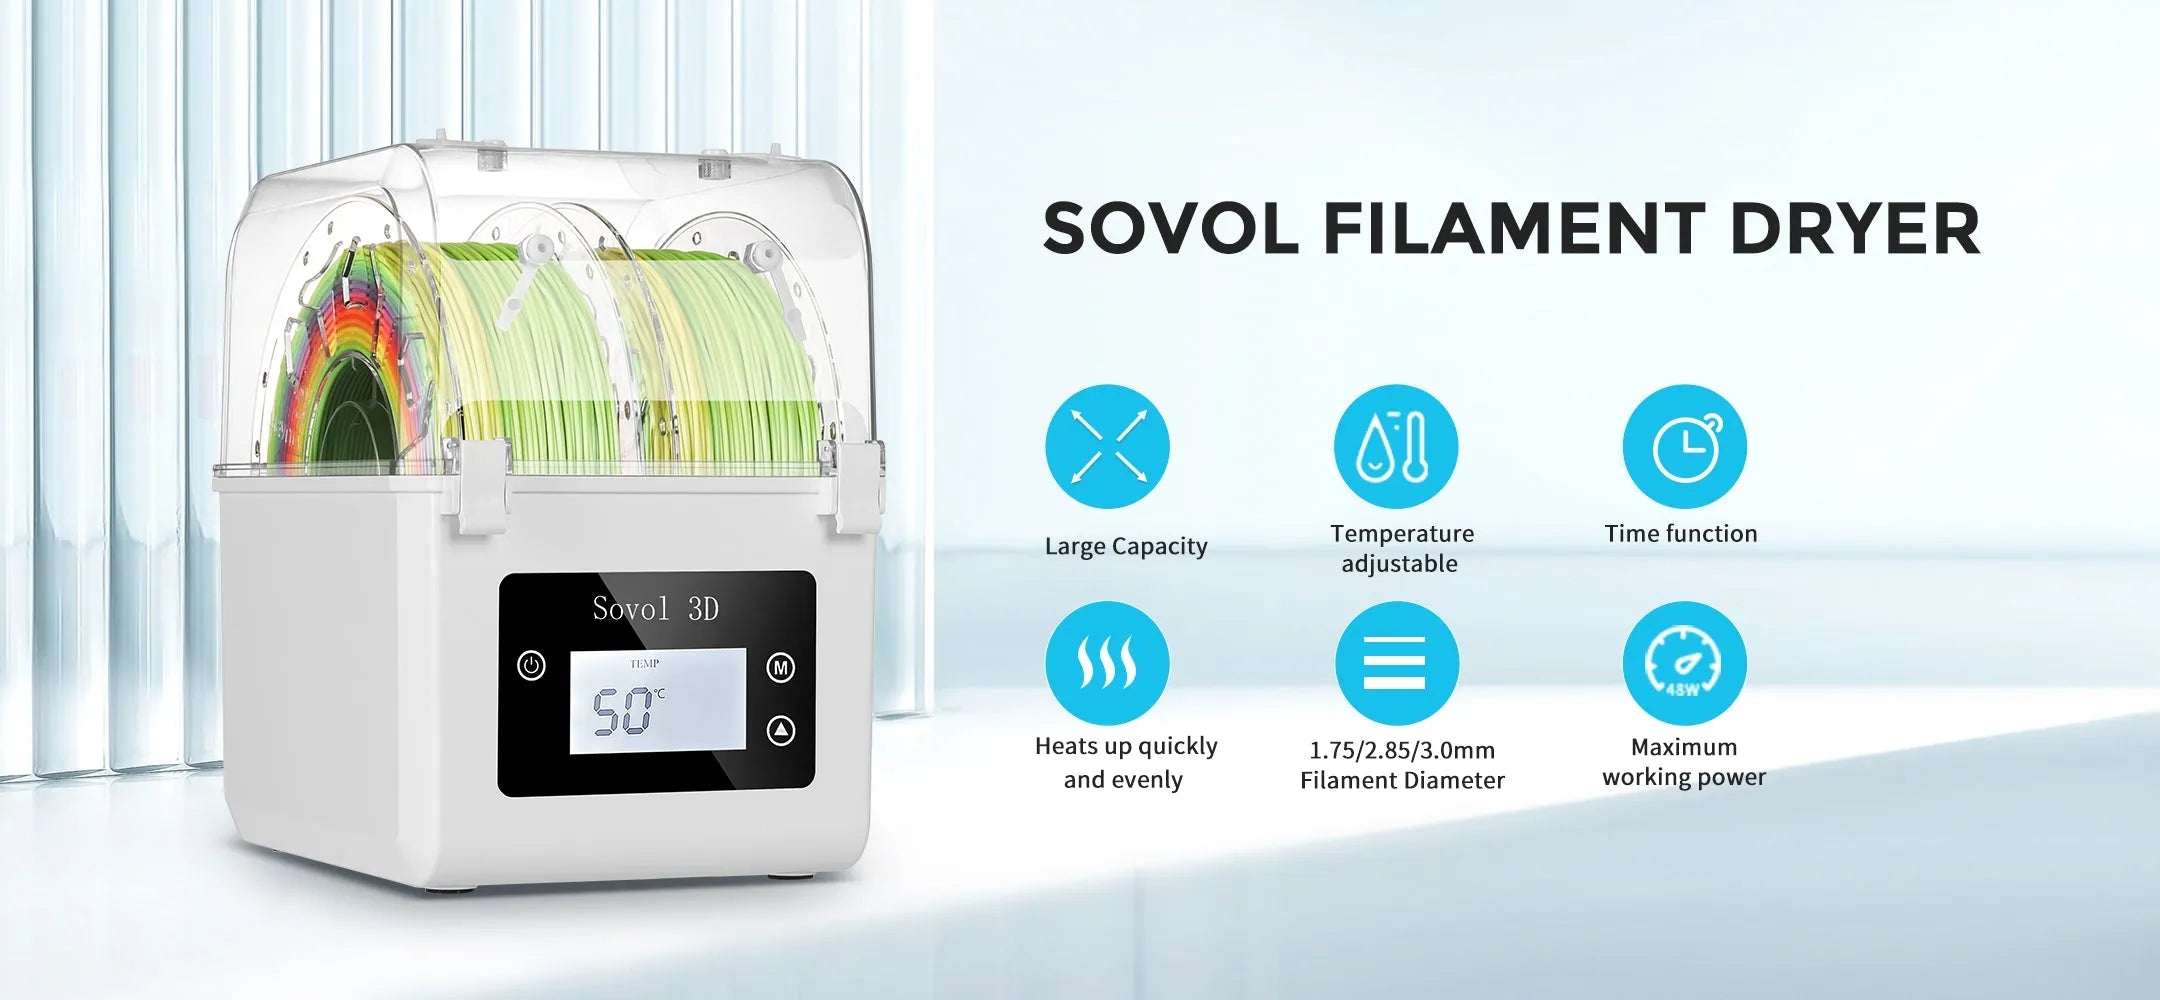 Sovol SH01 Filament Dryer: Keep your filament in prime condition